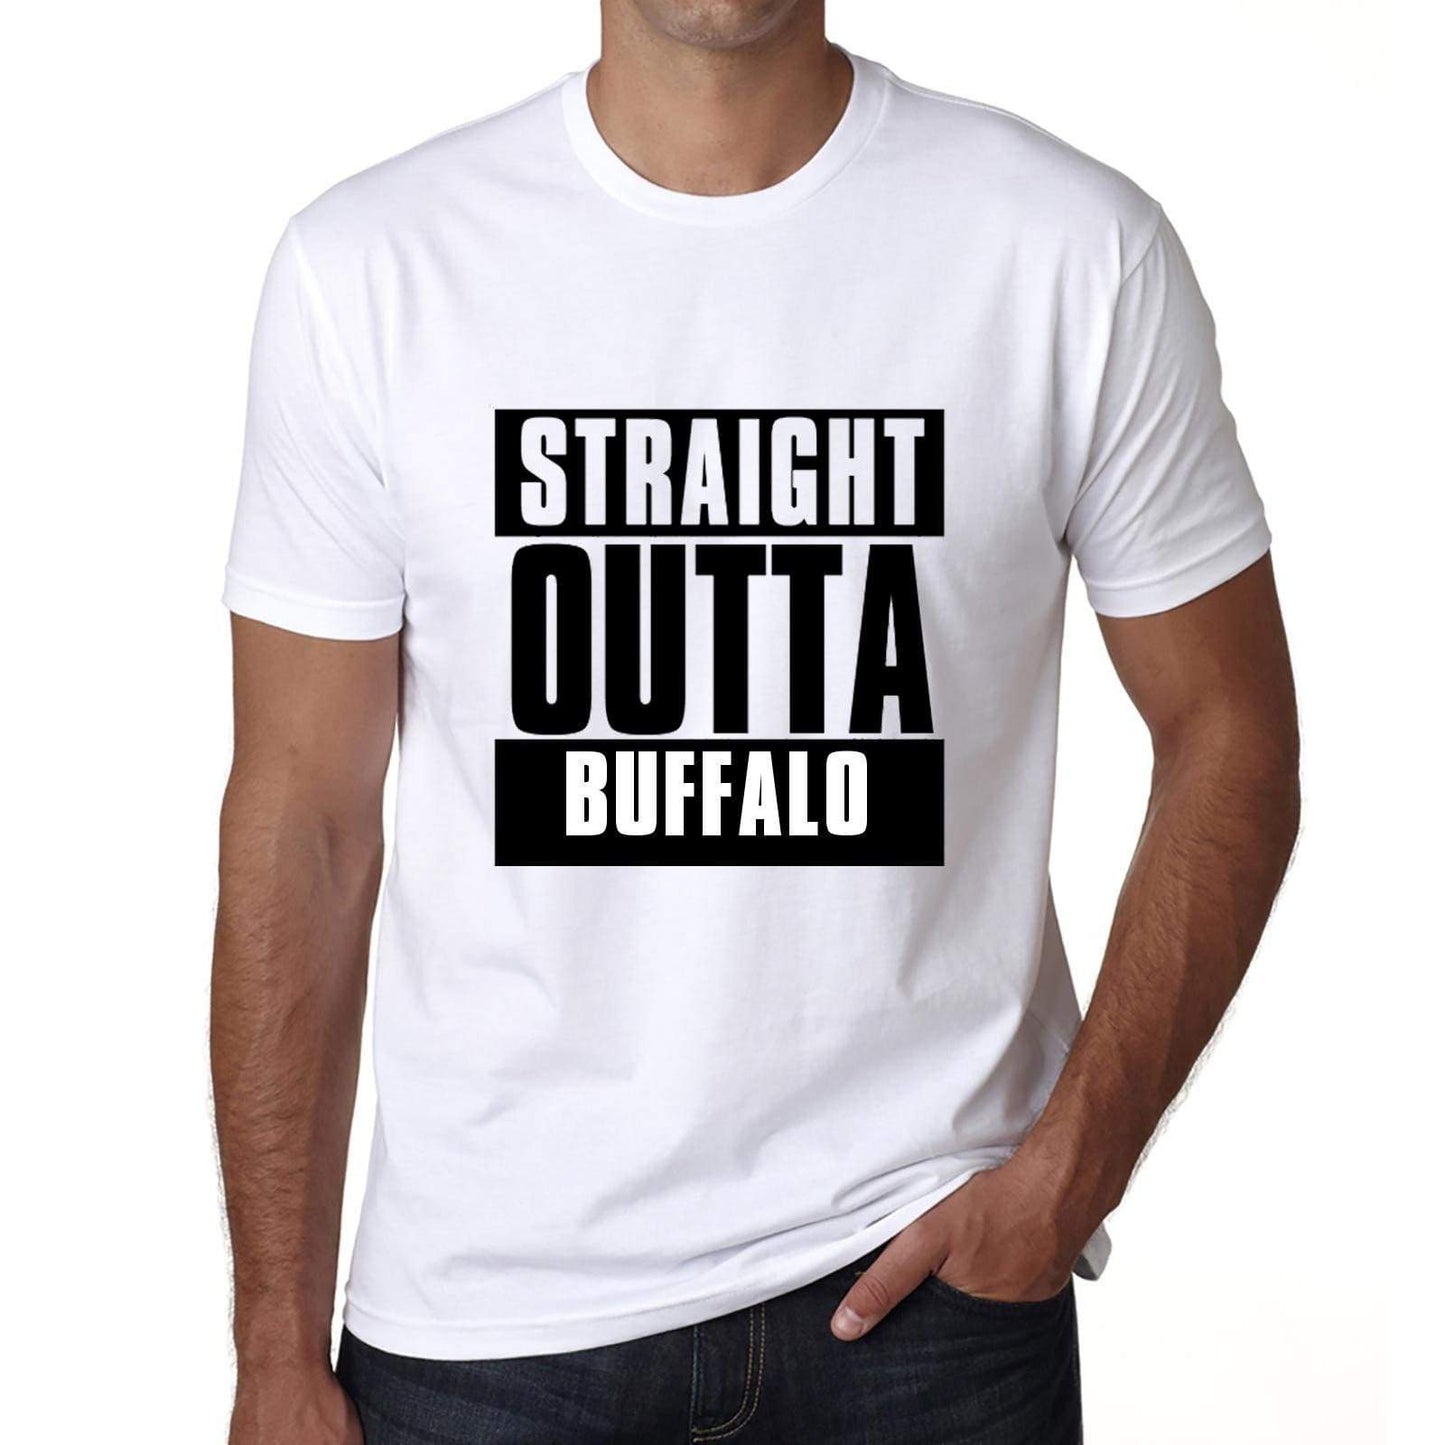 Straight Outta Buffalo Mens Short Sleeve Round Neck T-Shirt 00027 - White / S - Casual